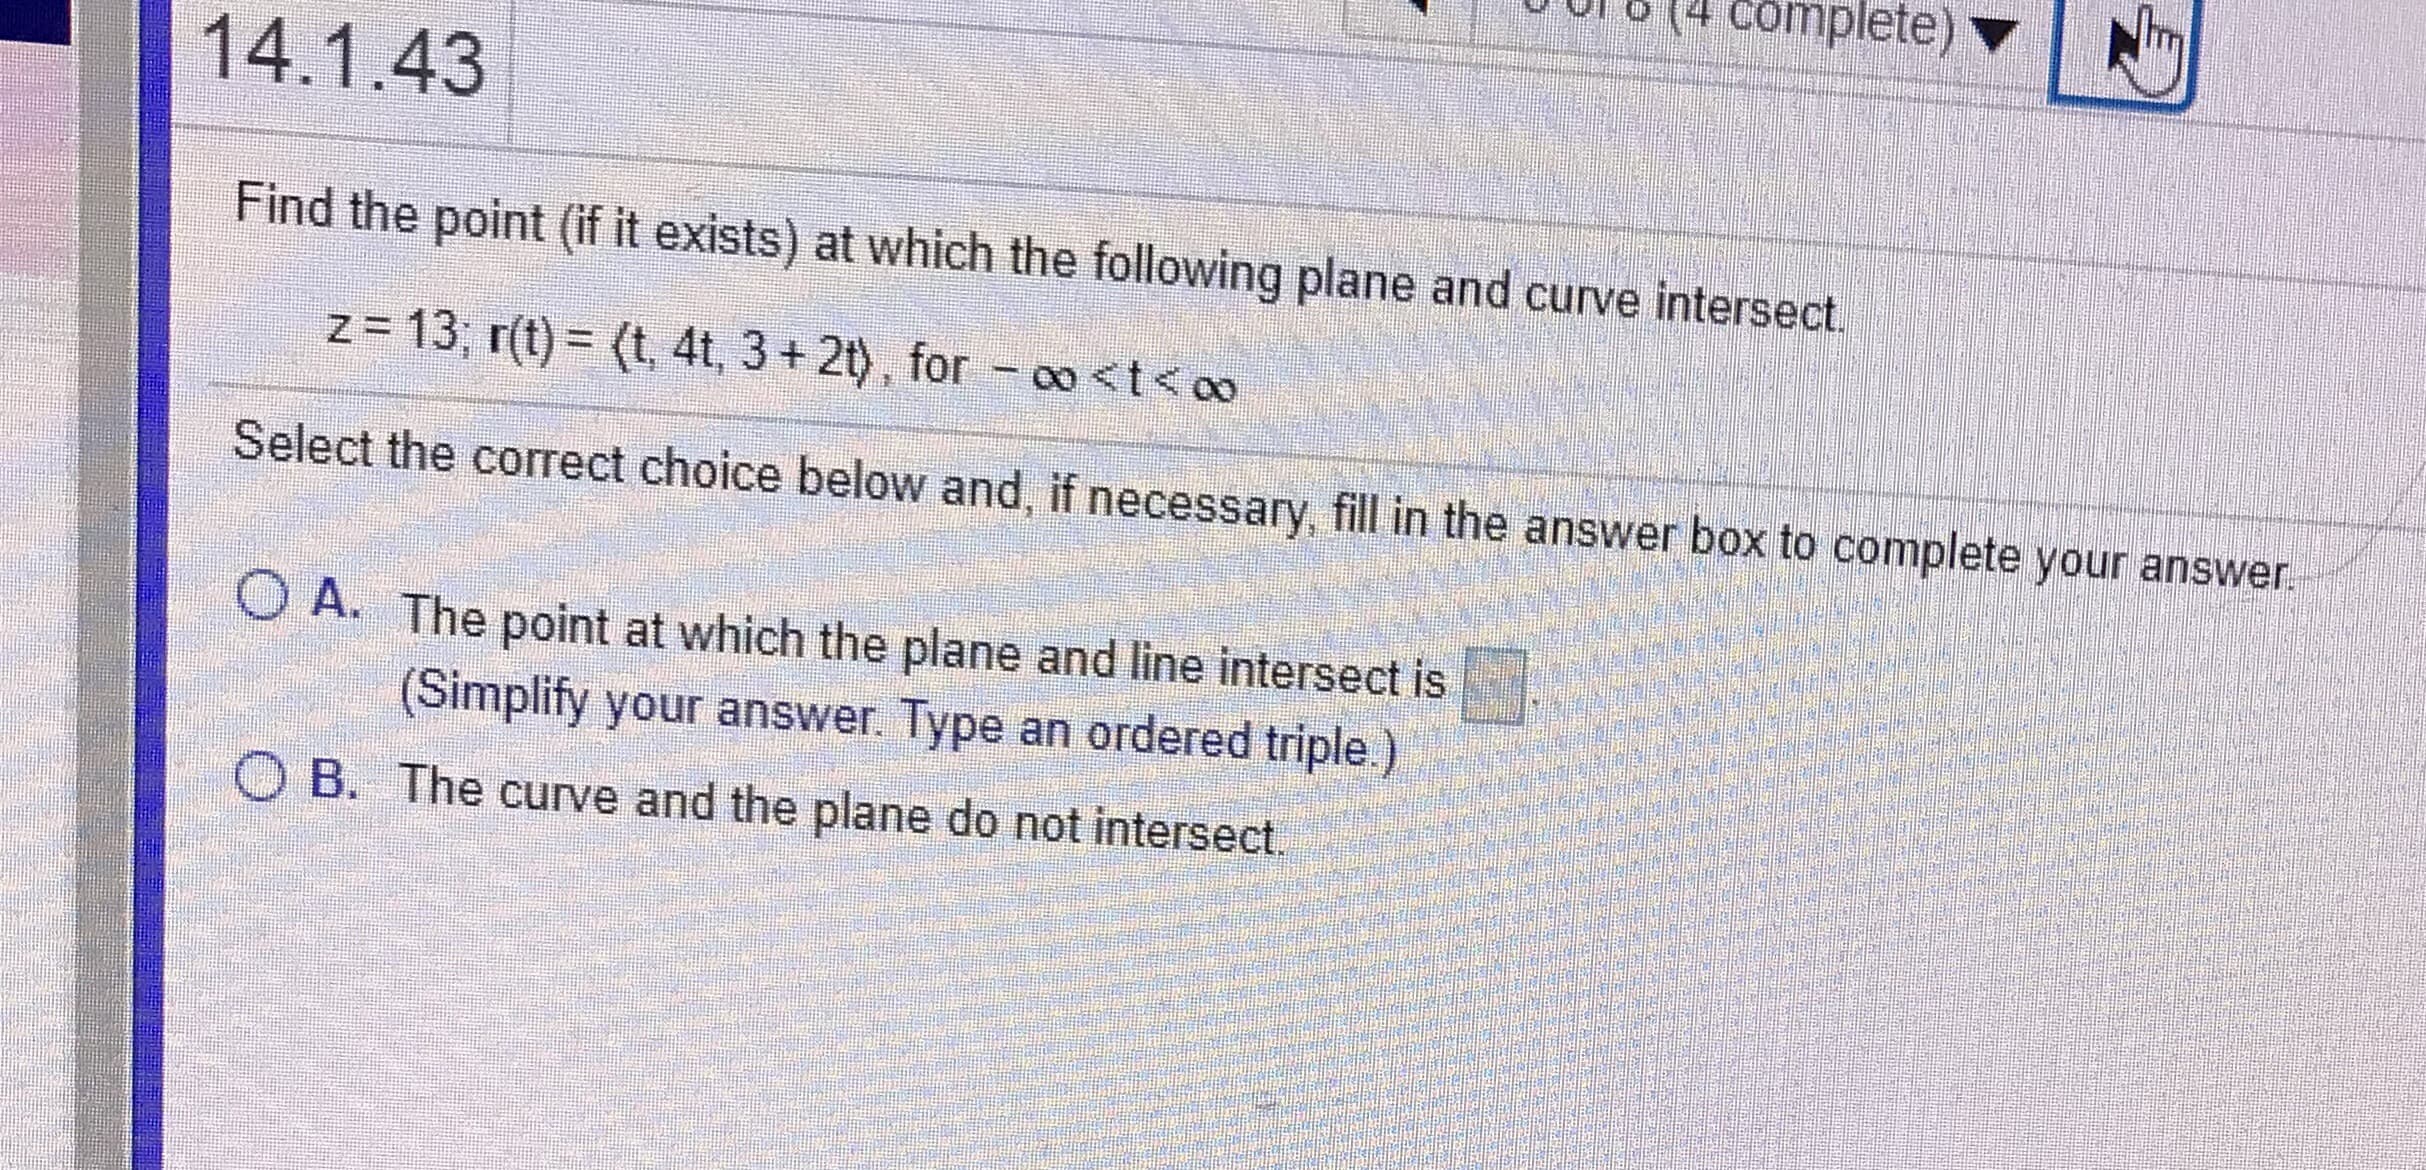 Find the point (if it exists) at which the following plane and curve intersect.
z= 13, r(t) = (t, 4t, 3 + 2t), for – 00<t<oo
%3D
Select the correct choice below and, if necessary, fill in the answer box to complete your answer.
O A. The point at which the plane and line intersect is
(Simplify your answer. Type an ordered triple.)
O B. The curve and the plane do not intersect.
